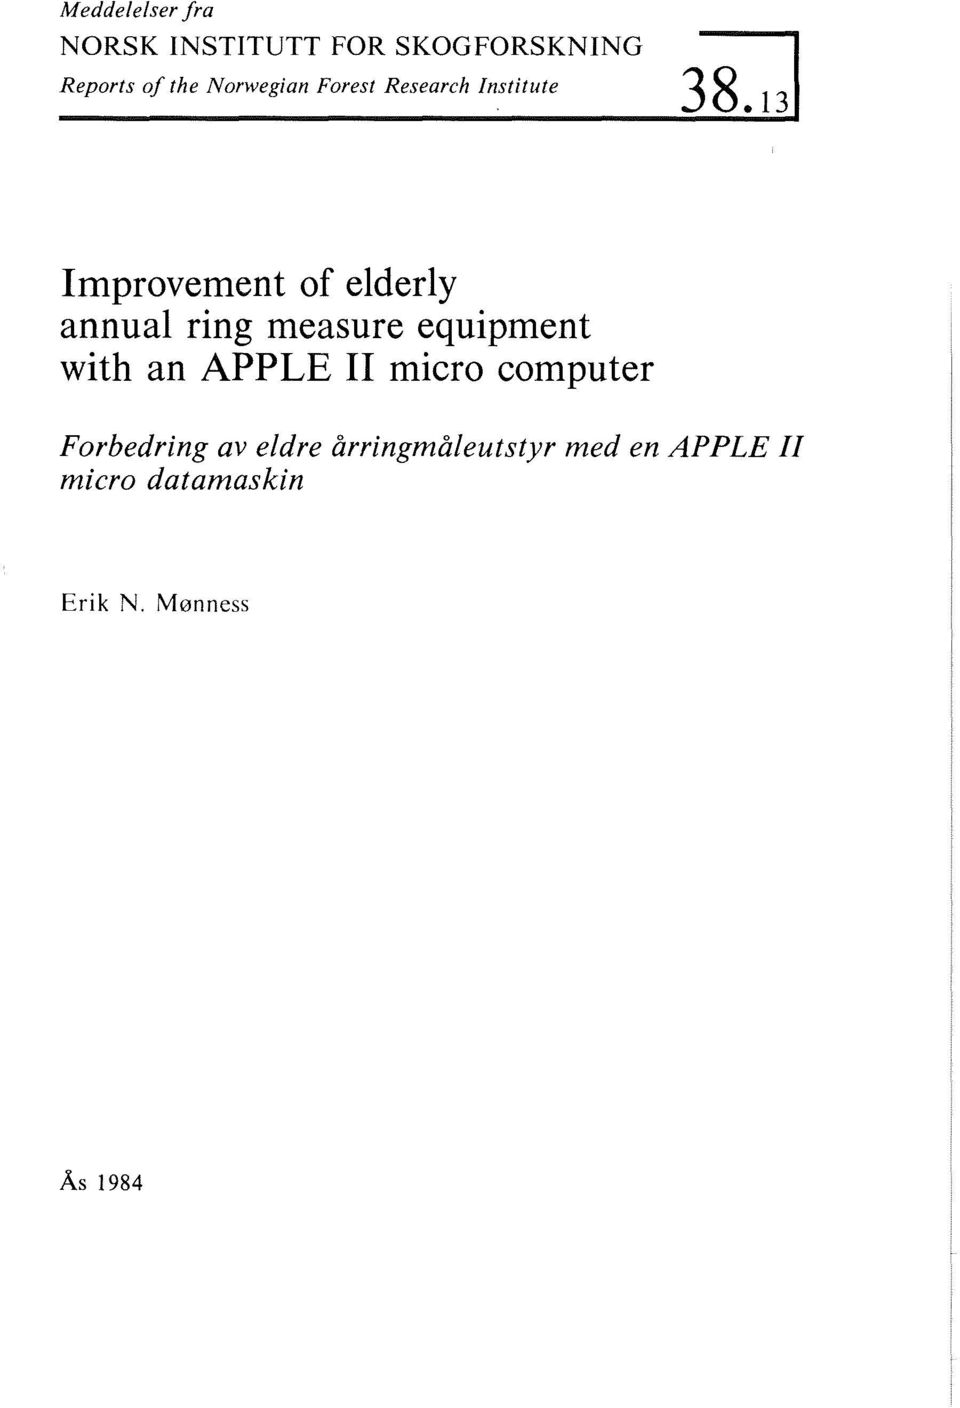 13 Improvement of elderly annual ring measure equipment with an APPLE